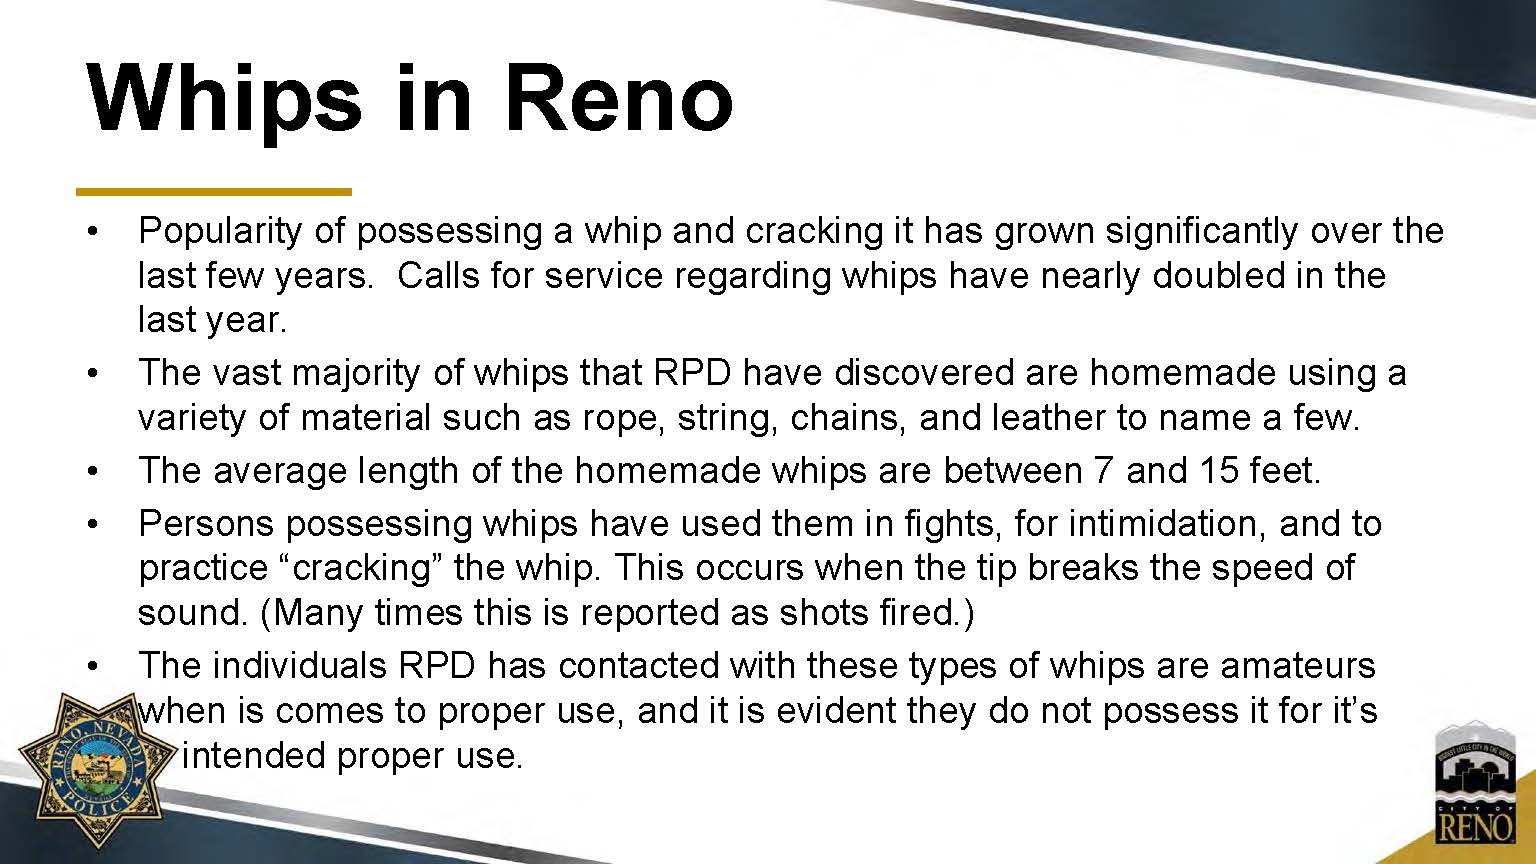 Whip Ordinance Powerpoint Small_Page_02.jpg